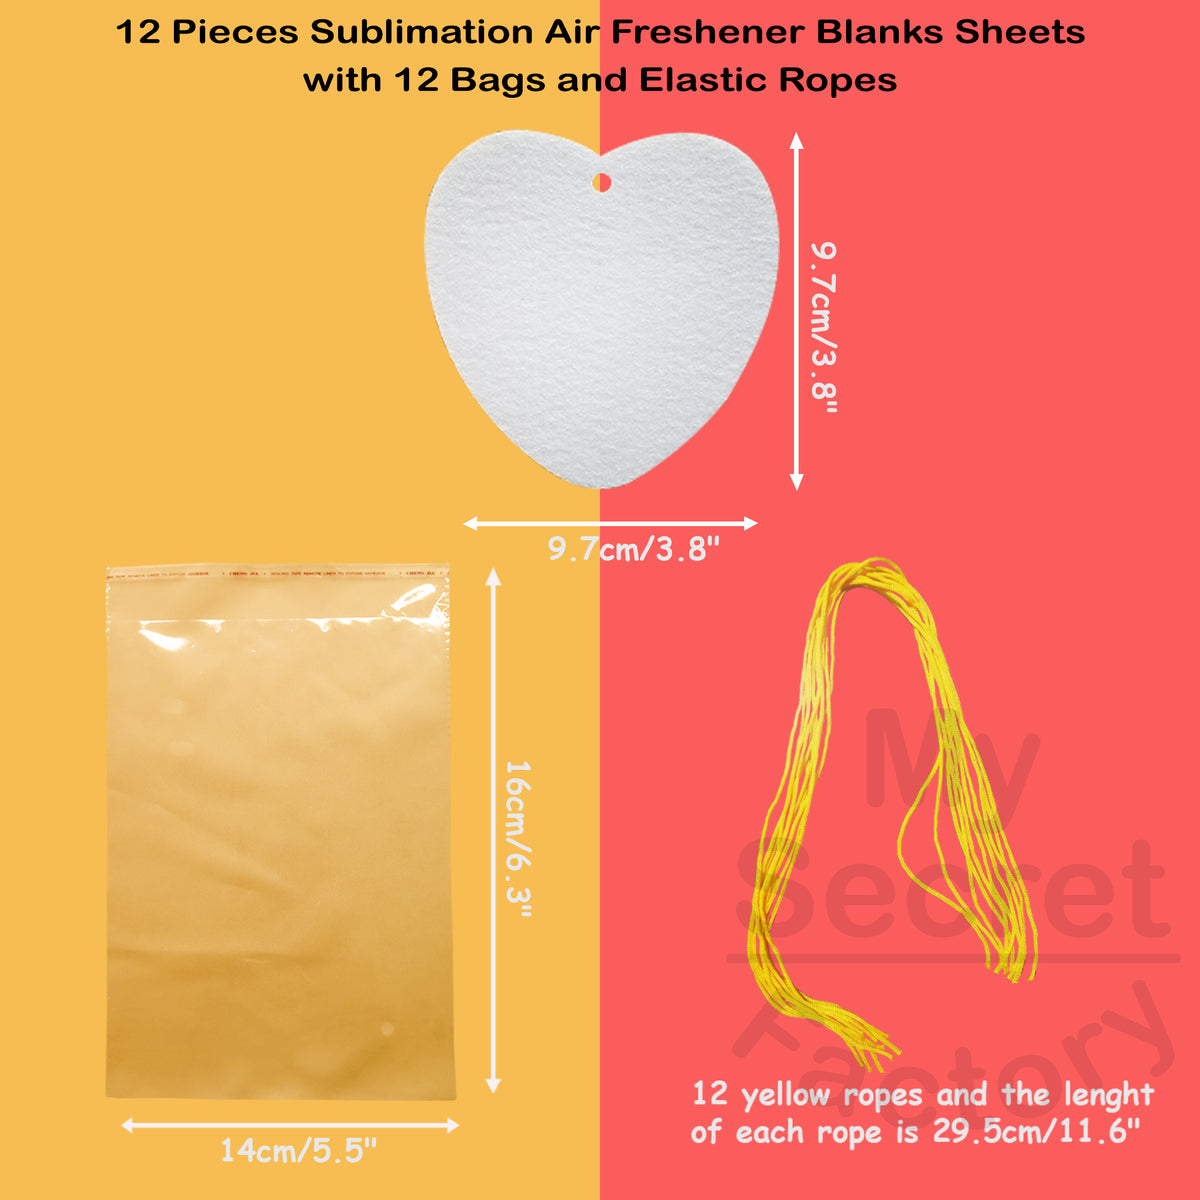 12 Pieces Horizontal rectangle Sublimation Air Freshener Blanks Sheets with  12 bags and Ropes